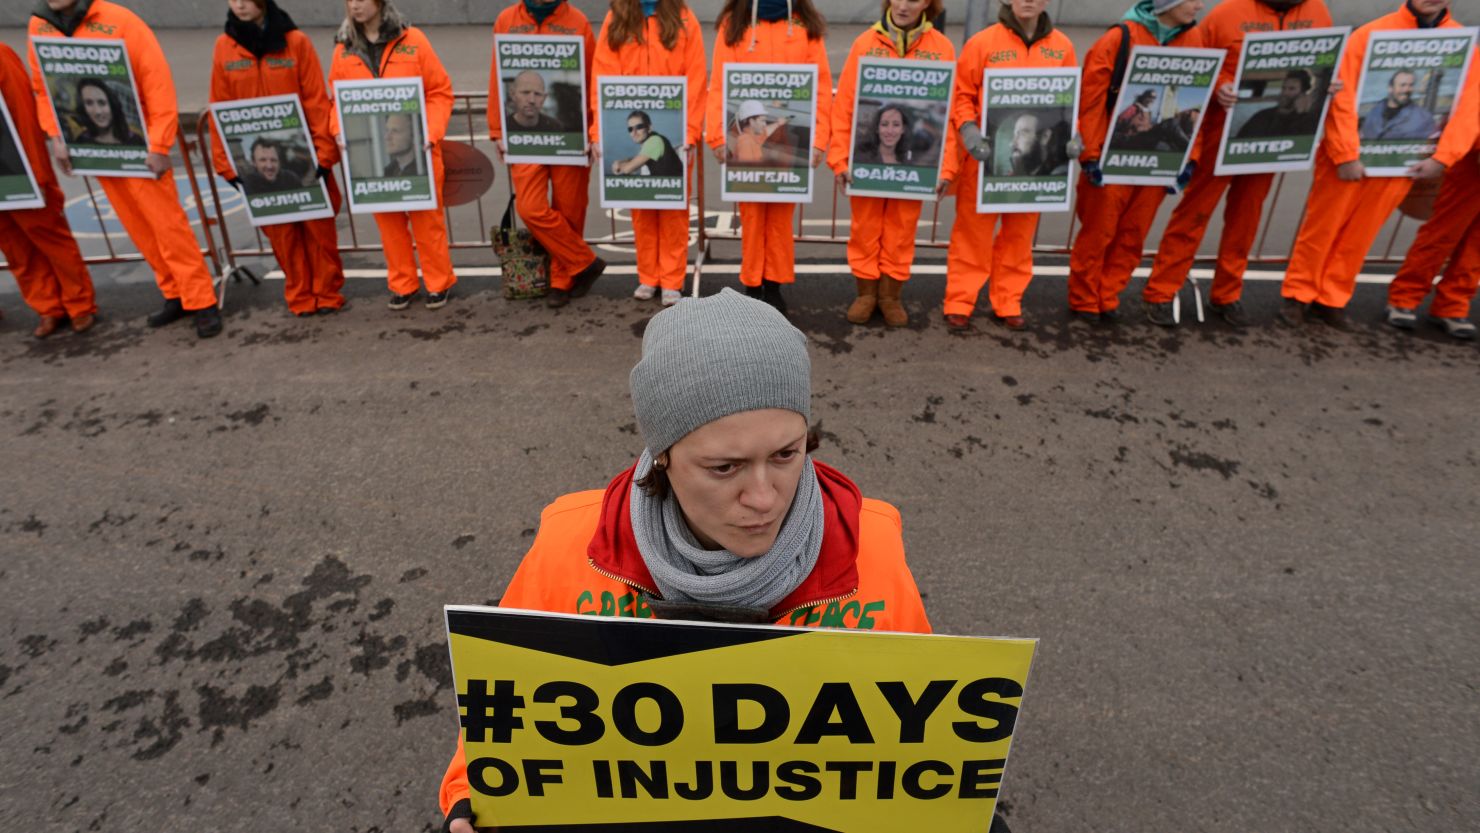 Greenpeace activists hold pictures of the detained 'Arctic 30' activists as they demonstrate in Moscow, on October 18, 2013.